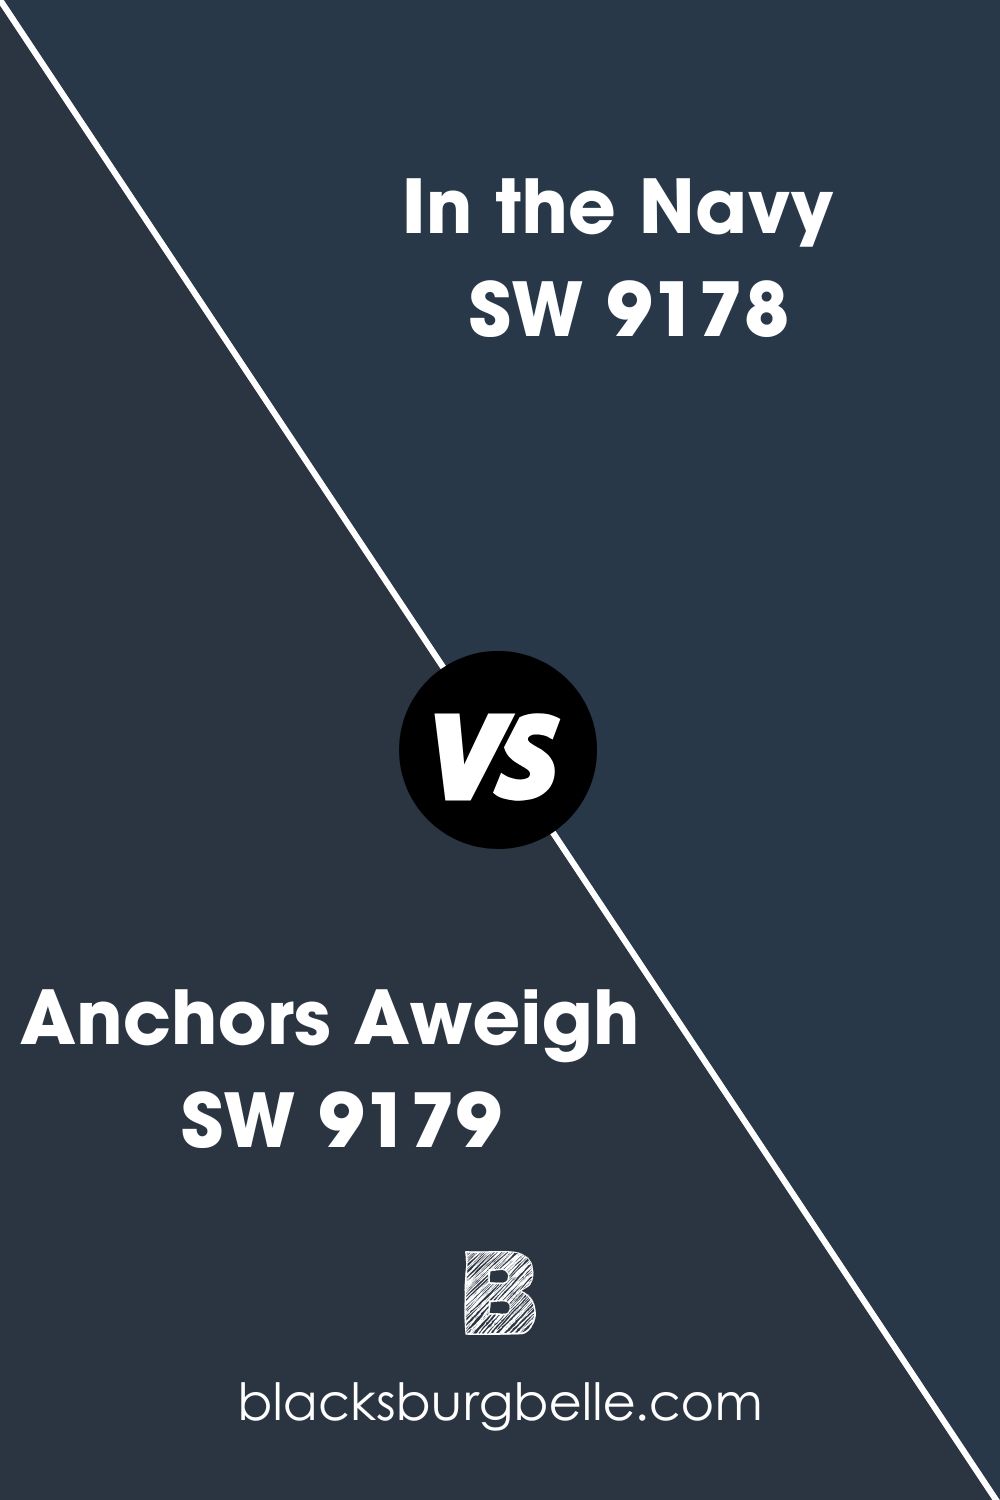 Anchors Aweigh SW 9179